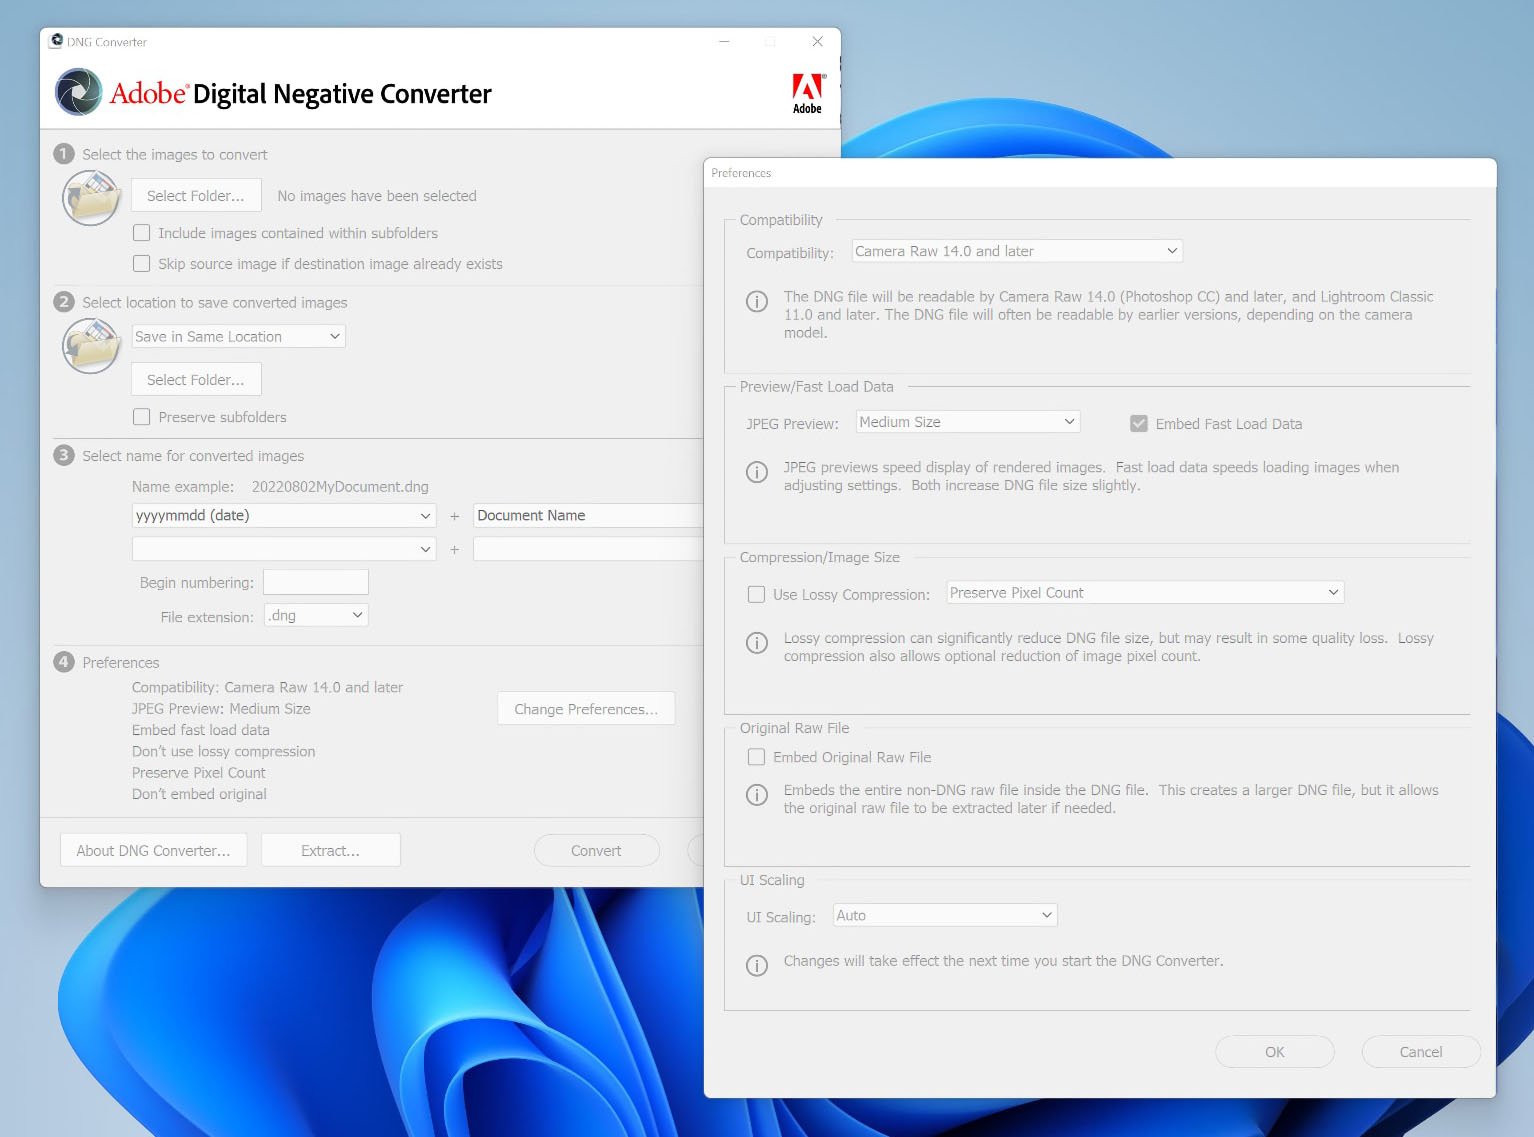 download the new for apple Adobe DNG Converter 16.0.1